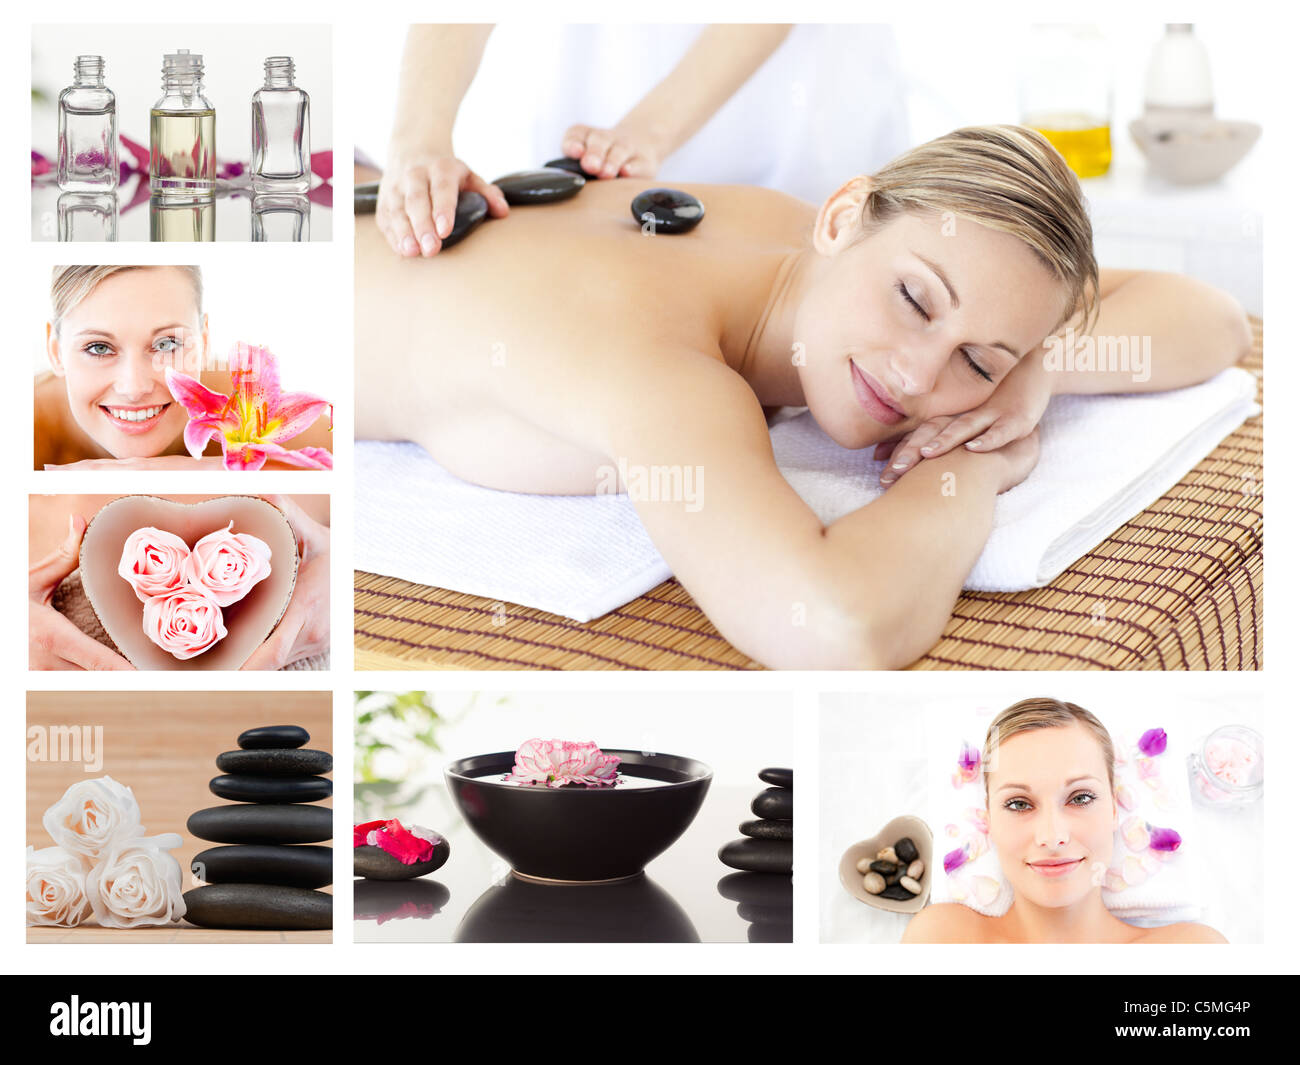 Collage of an attractive blond woman relaxing Stock Photo